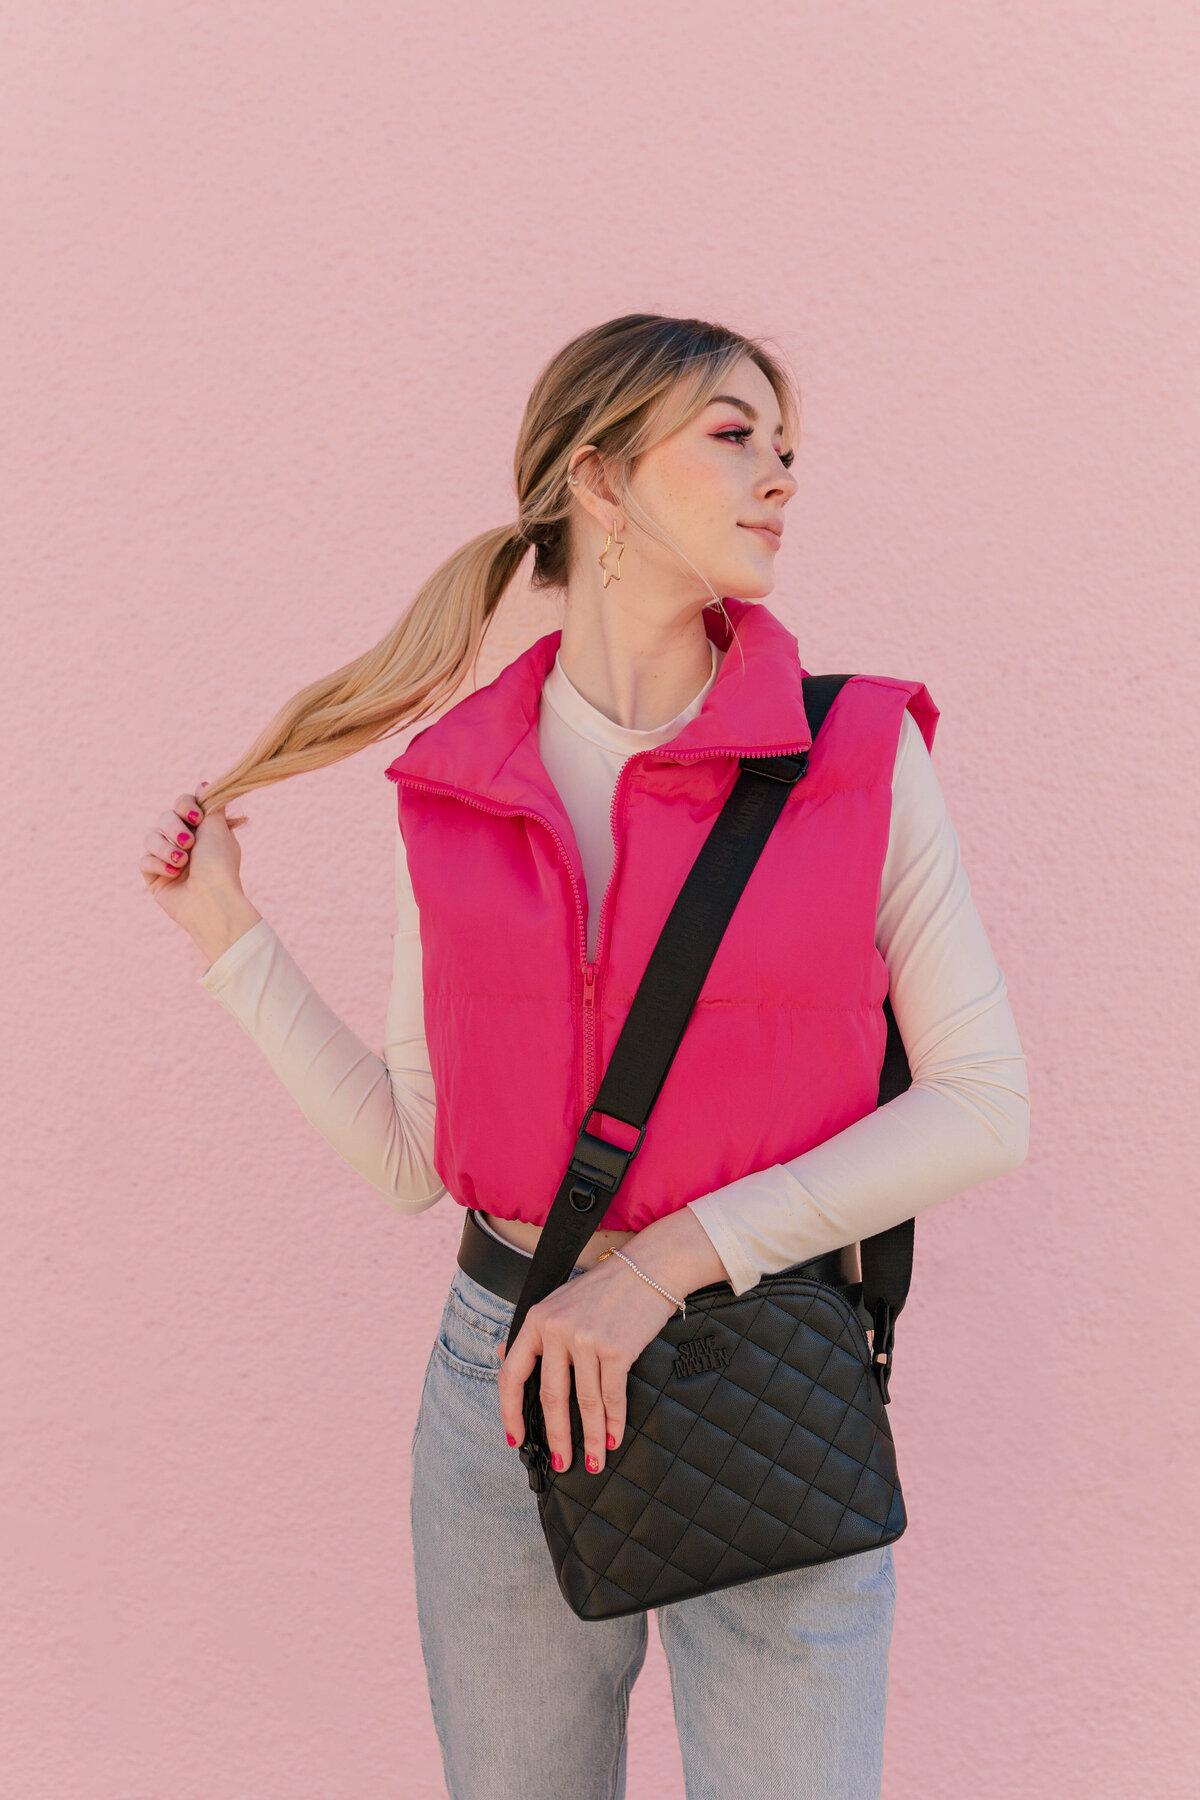 Sporty Barbie model poses in front of a pink wall with a hot pink vest and black purse on Westheimer